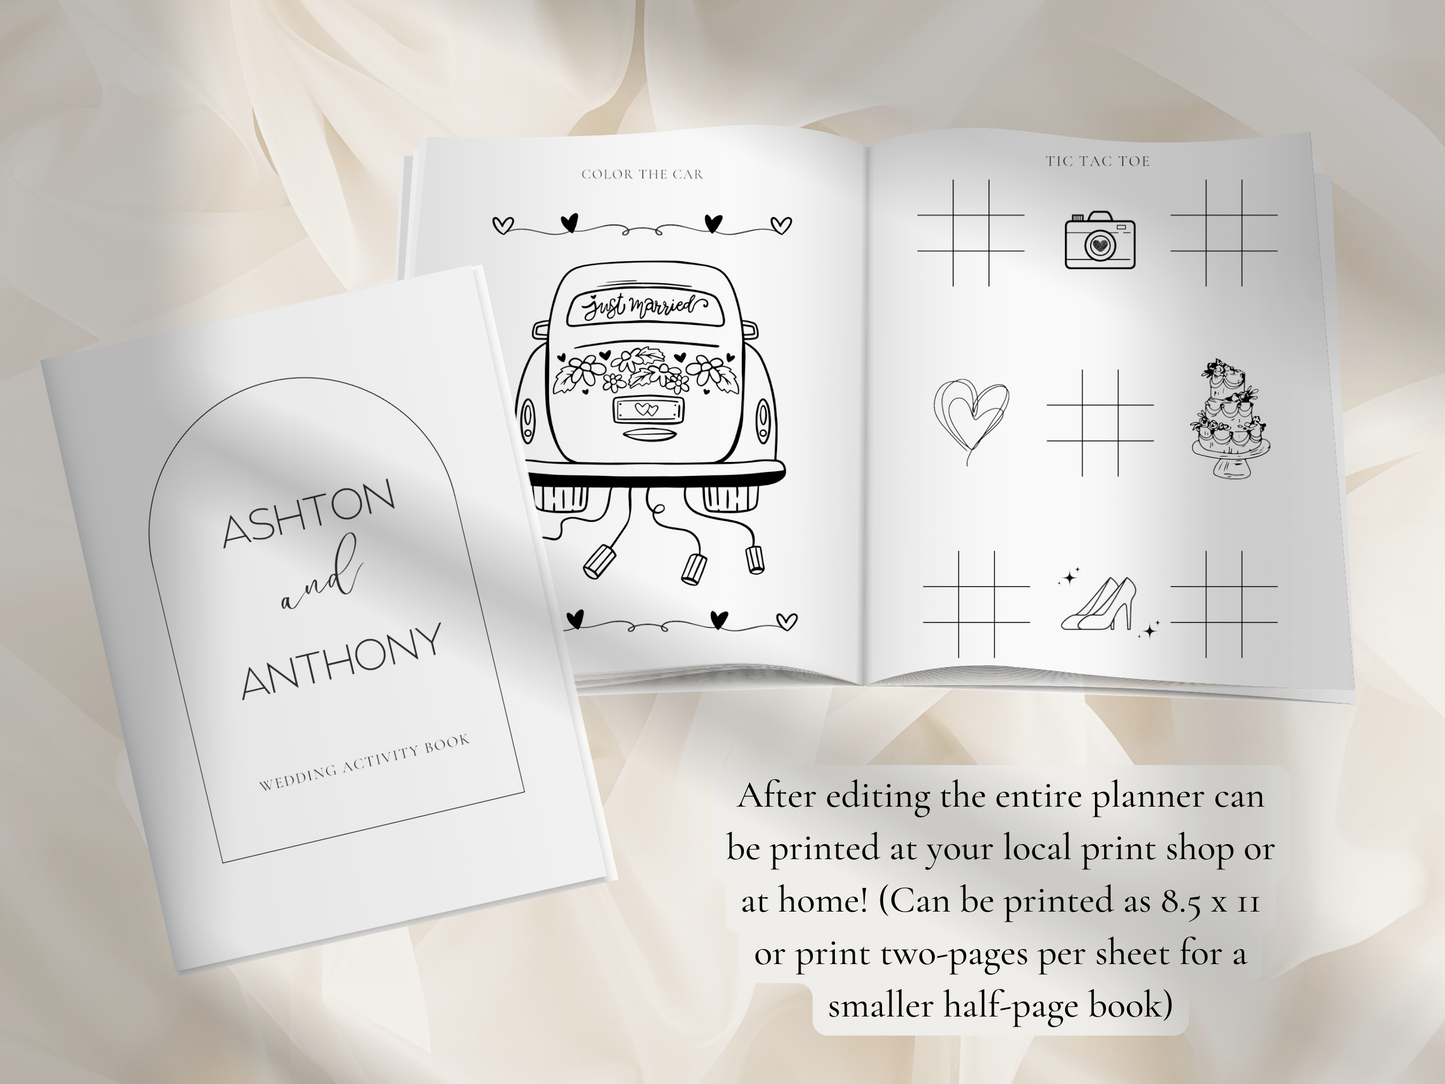 Personalized Wedding Coloring and Activity Book For Kids, Printable, Minimalist PLR